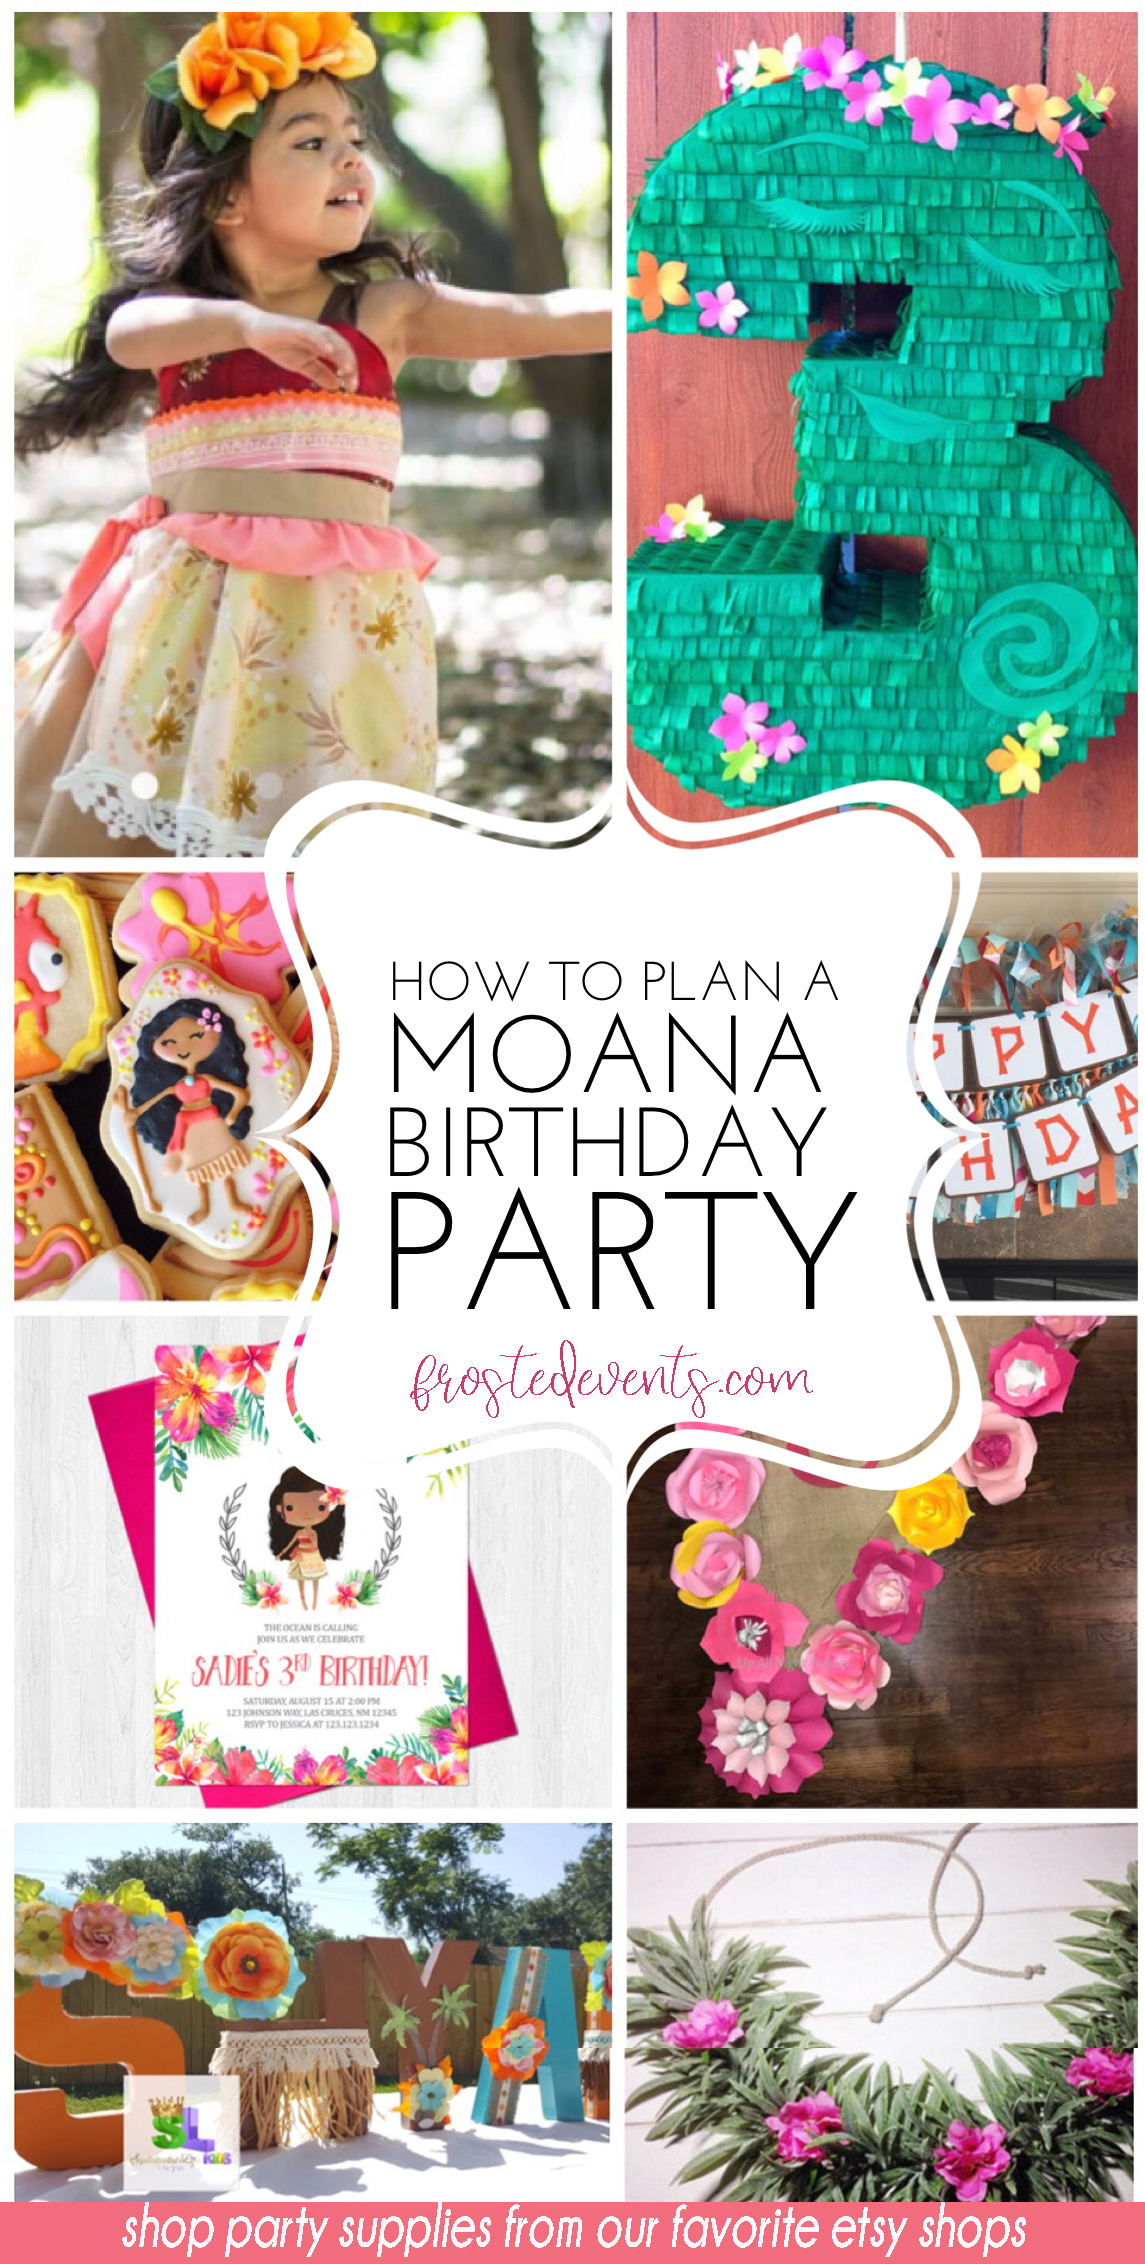 Moana Birthday Party Supplies - Moana Party Planner, shop links to moana party decorations via frostedevents.com 